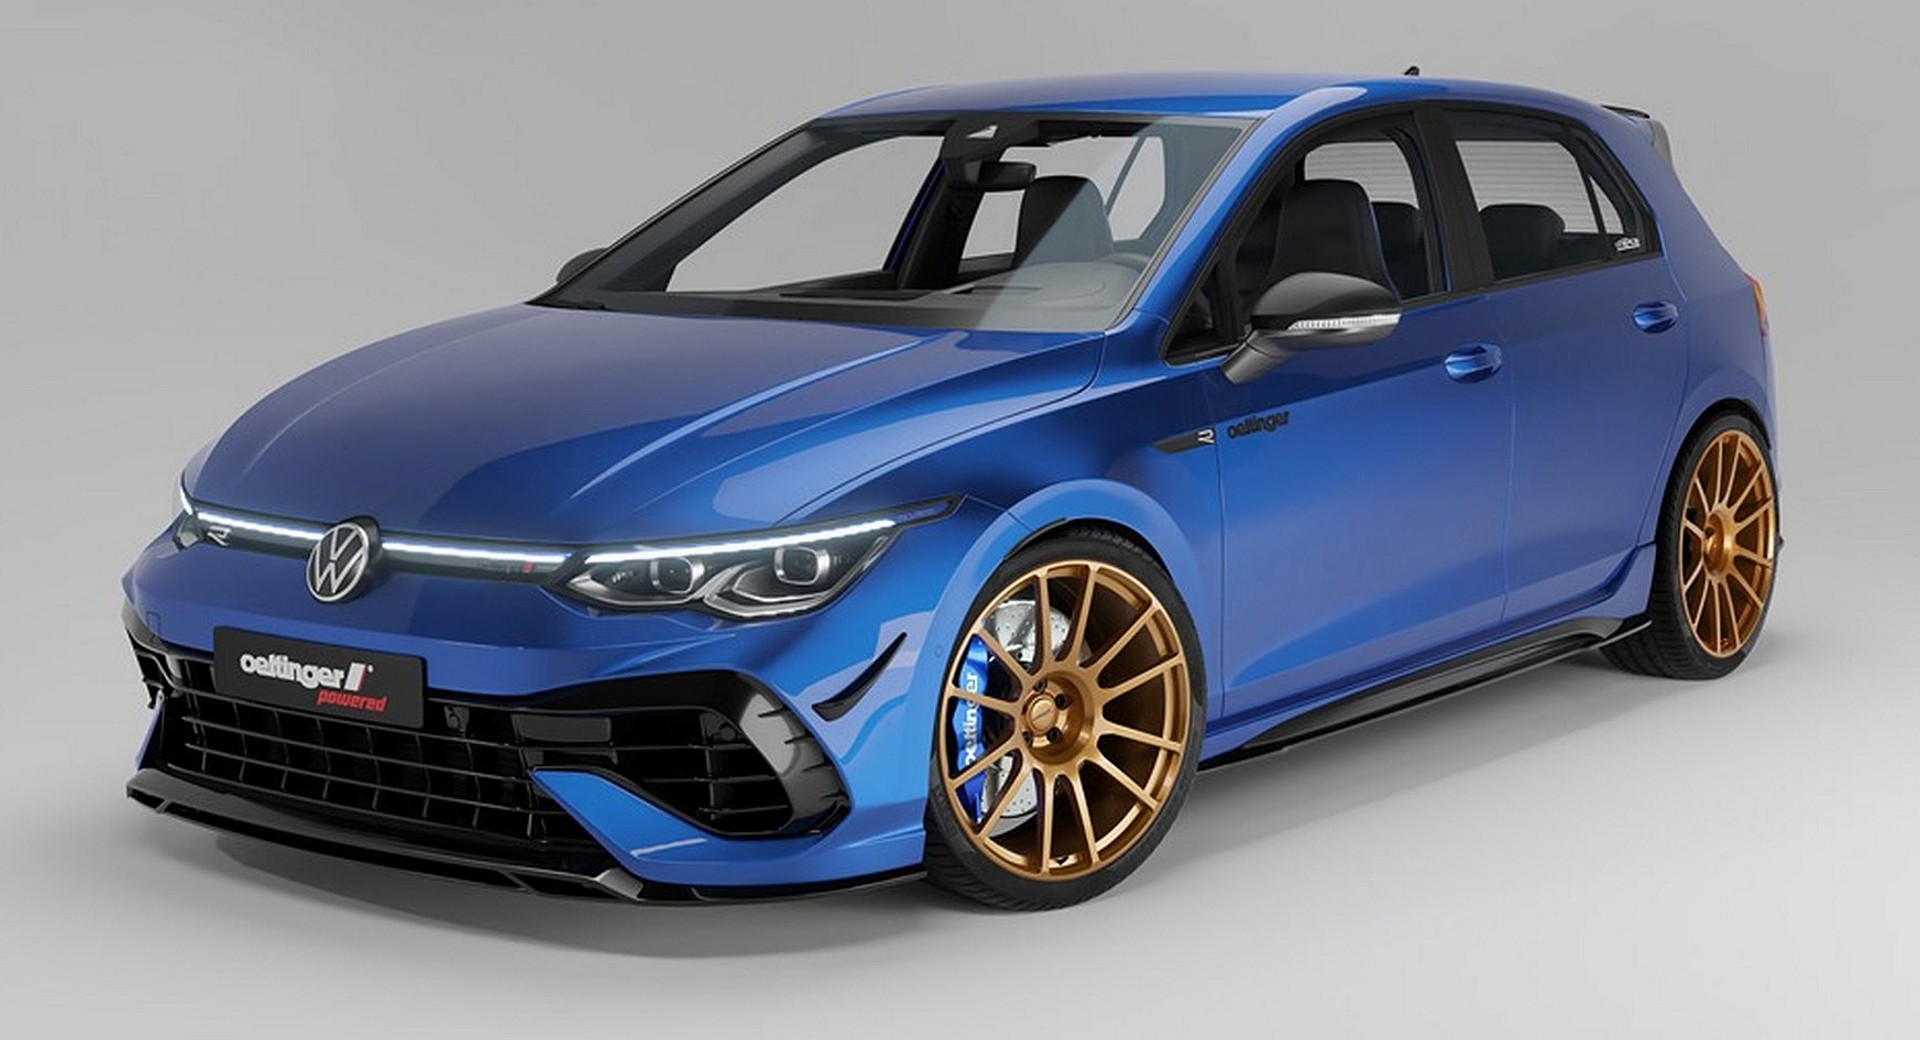 VW Golf R Spiced Up With Subtle Bodykit And Wheels By Oettinger